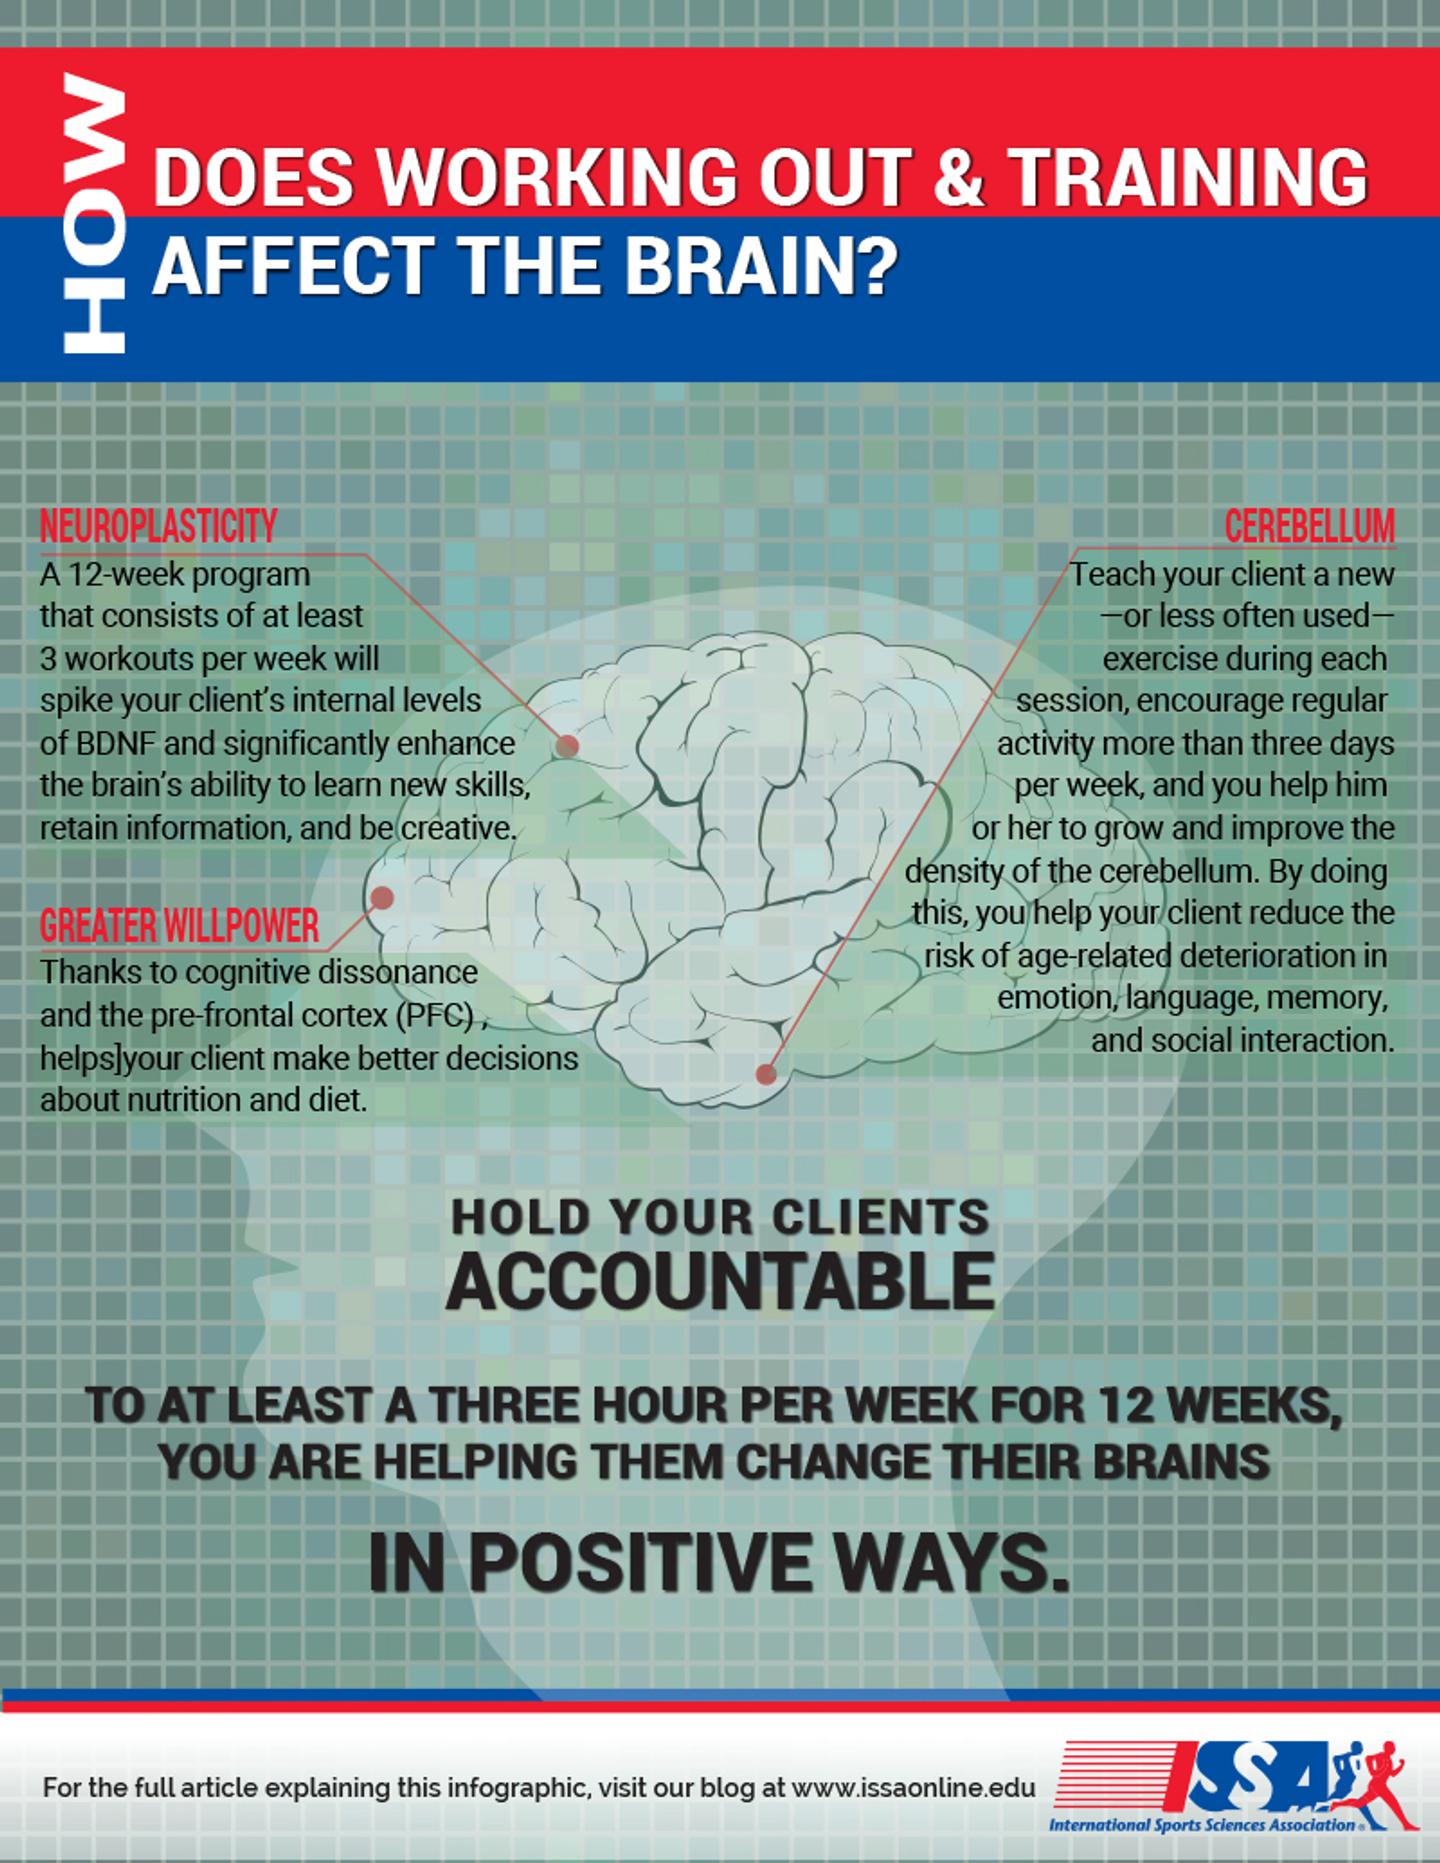 ISSA exercise and connections in the-brain infographic image